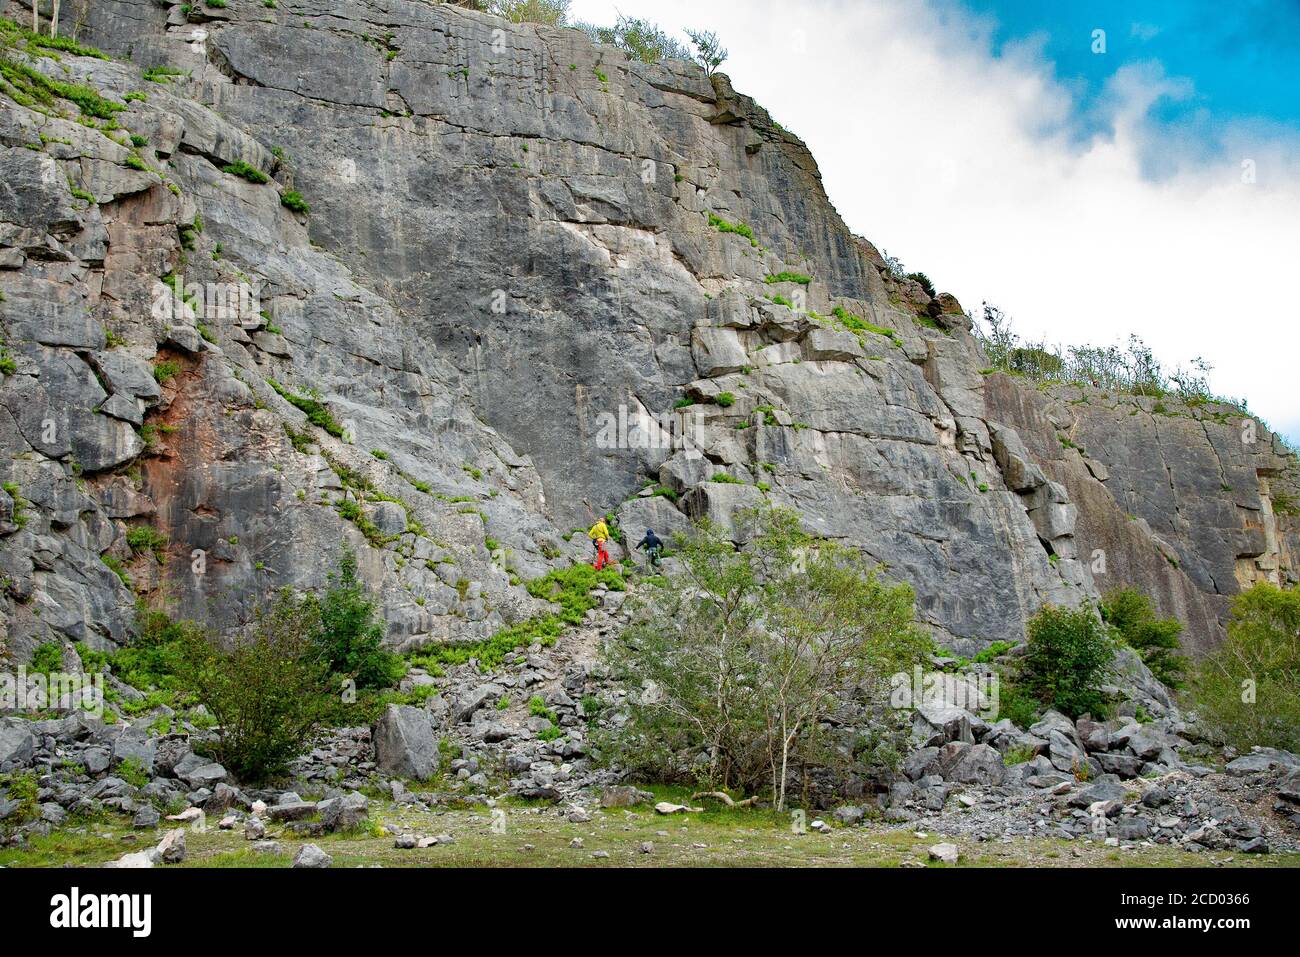 View of climbers on limestone cliff at  Trowbarrow Quarry Nature Reserve, Silverdale, Carnforth, Lancashire, UK. Stock Photo